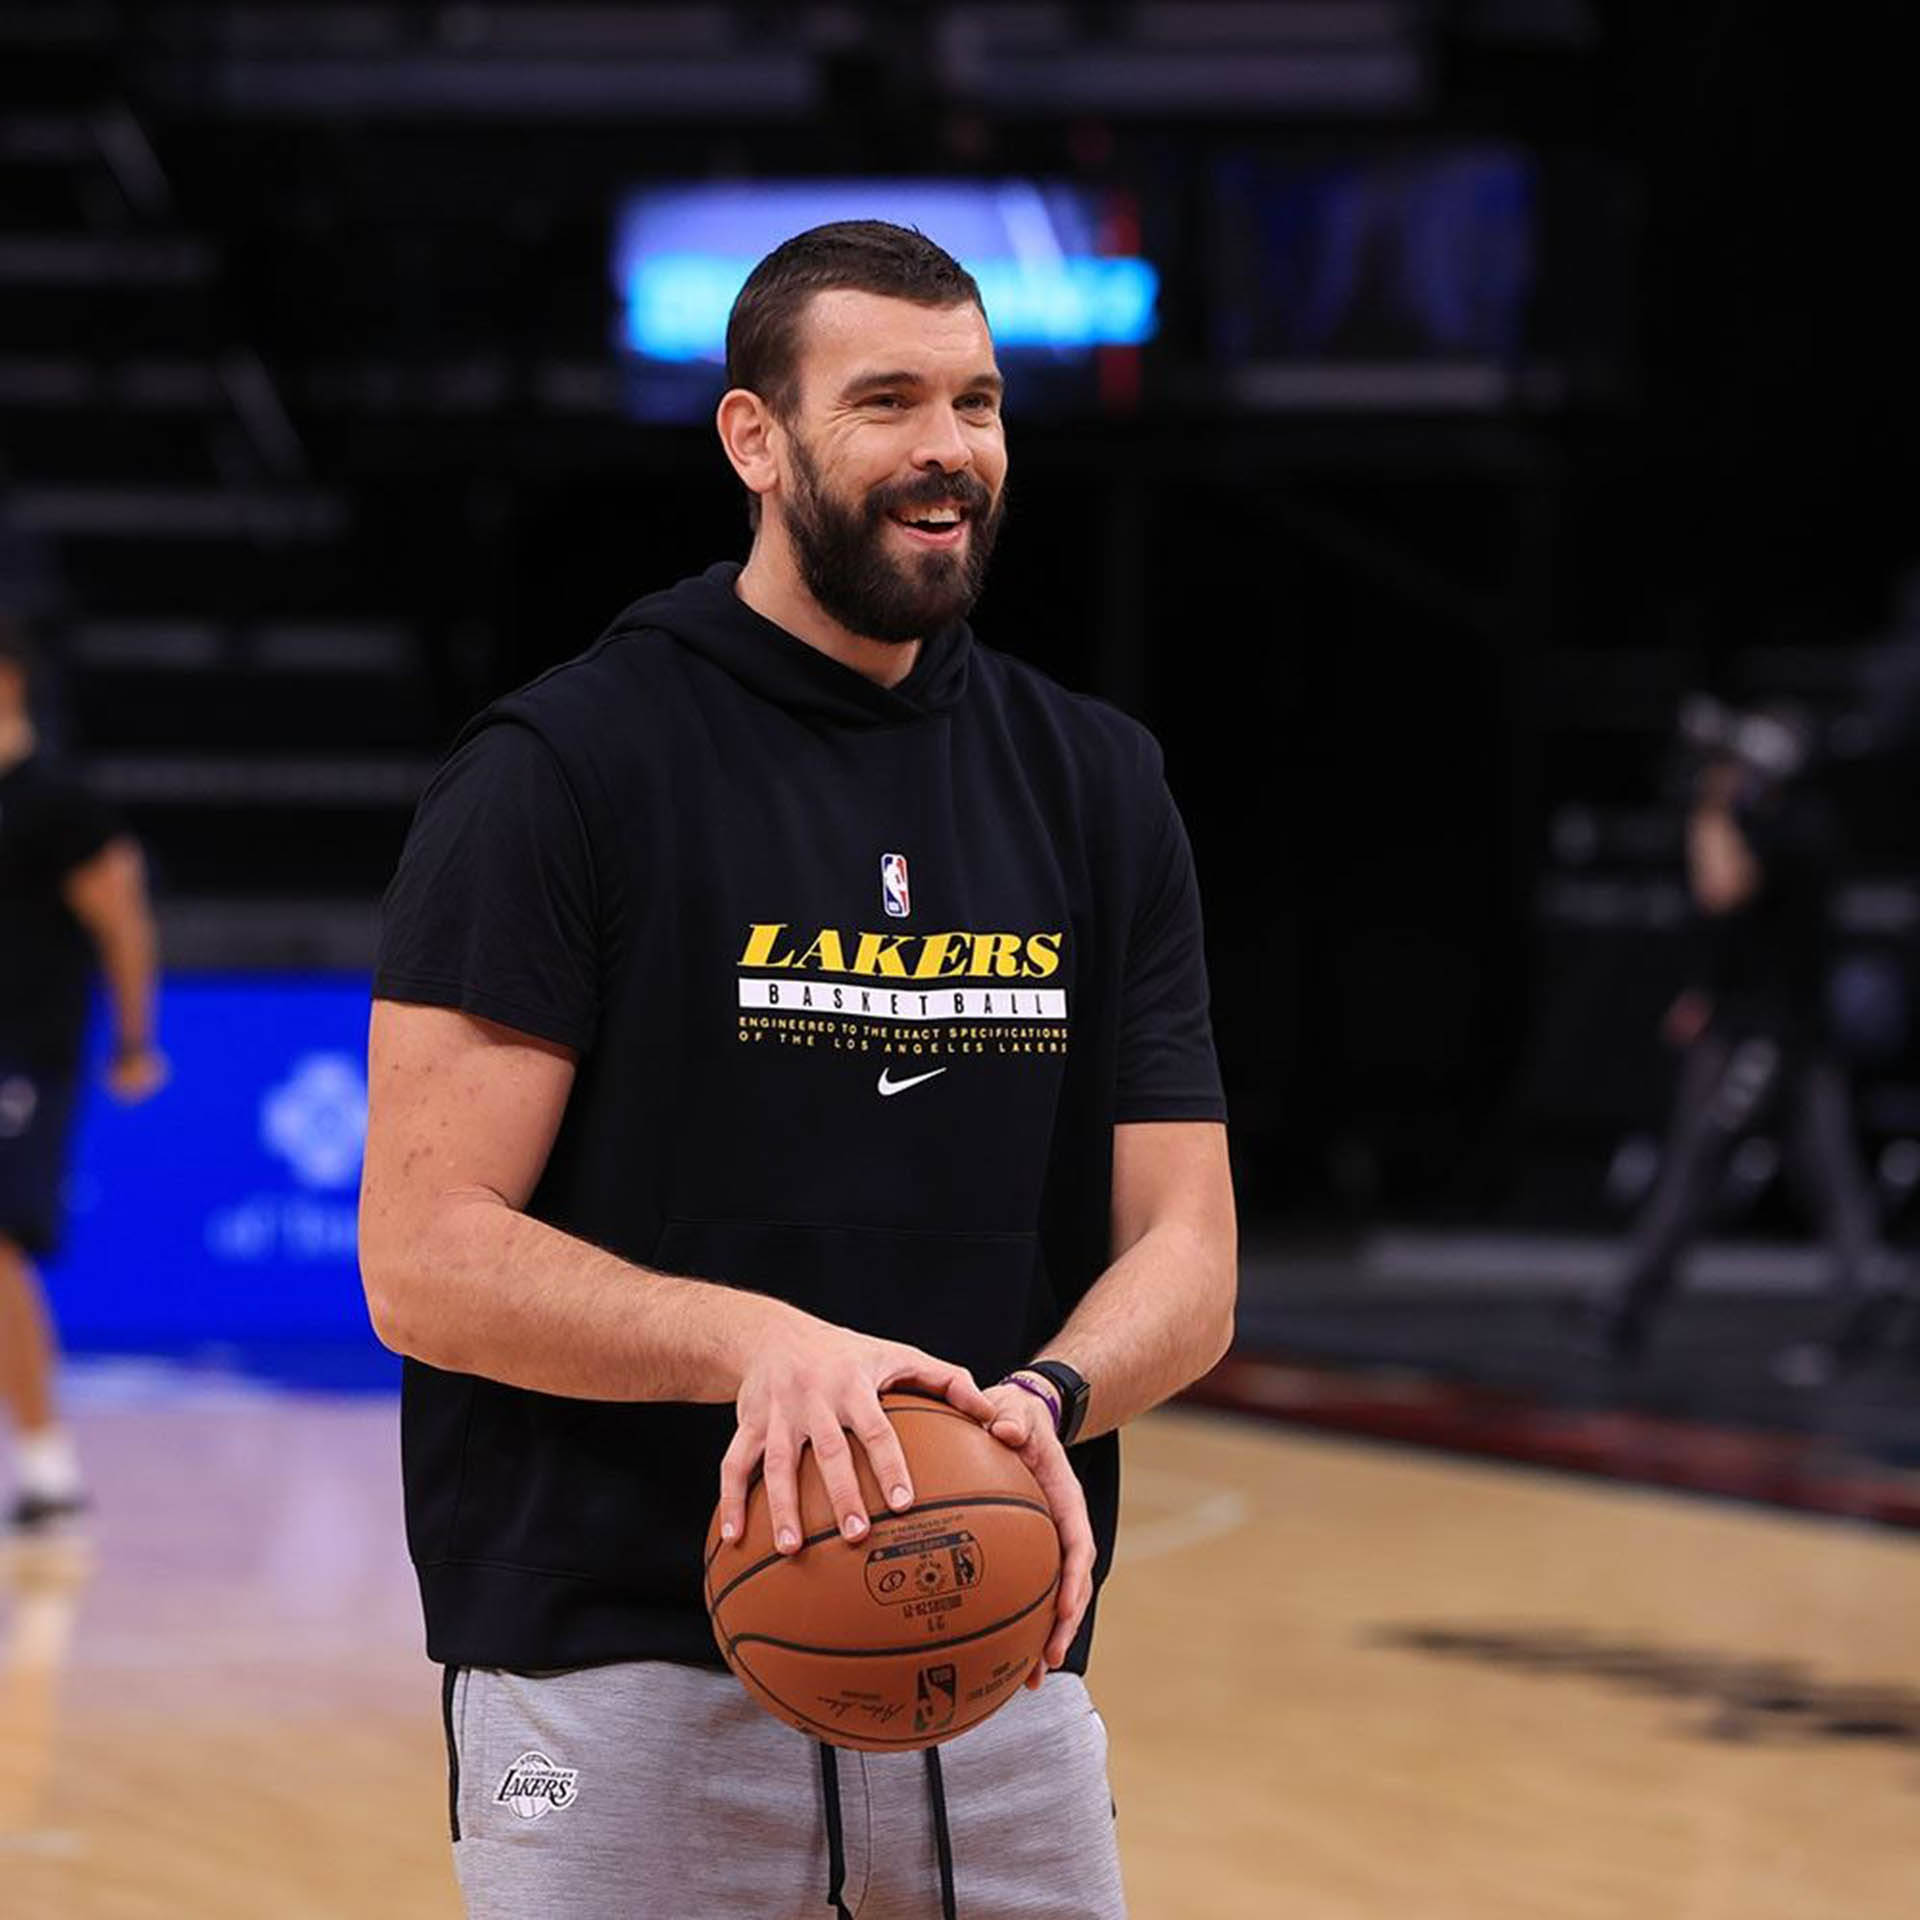 Lakers Center, Marc Gasol Seen Warming Up Before A Game.